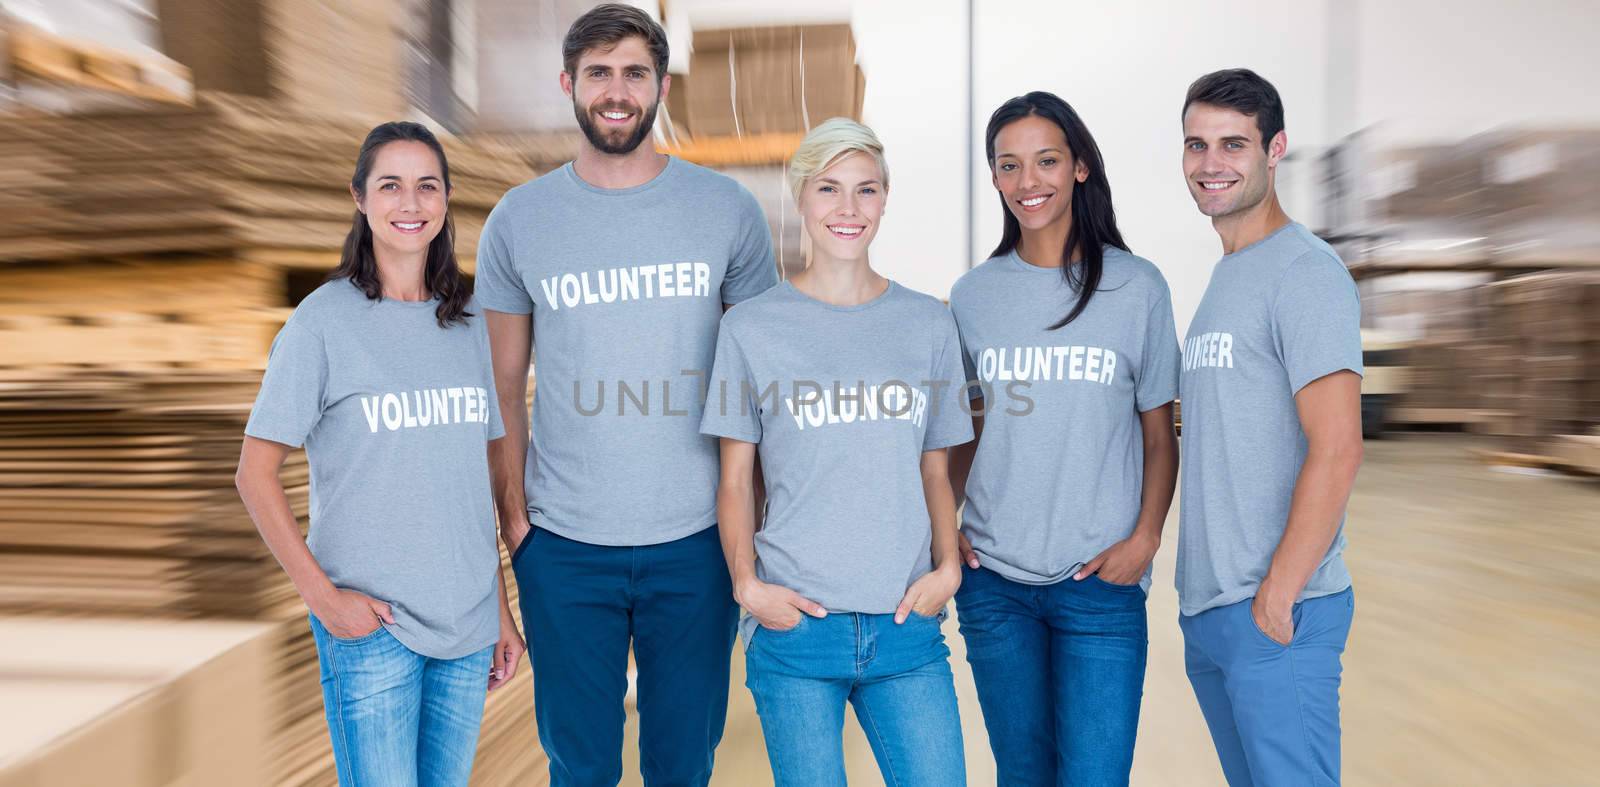 Composite image of volunteers friends smiling at the camera by Wavebreakmedia